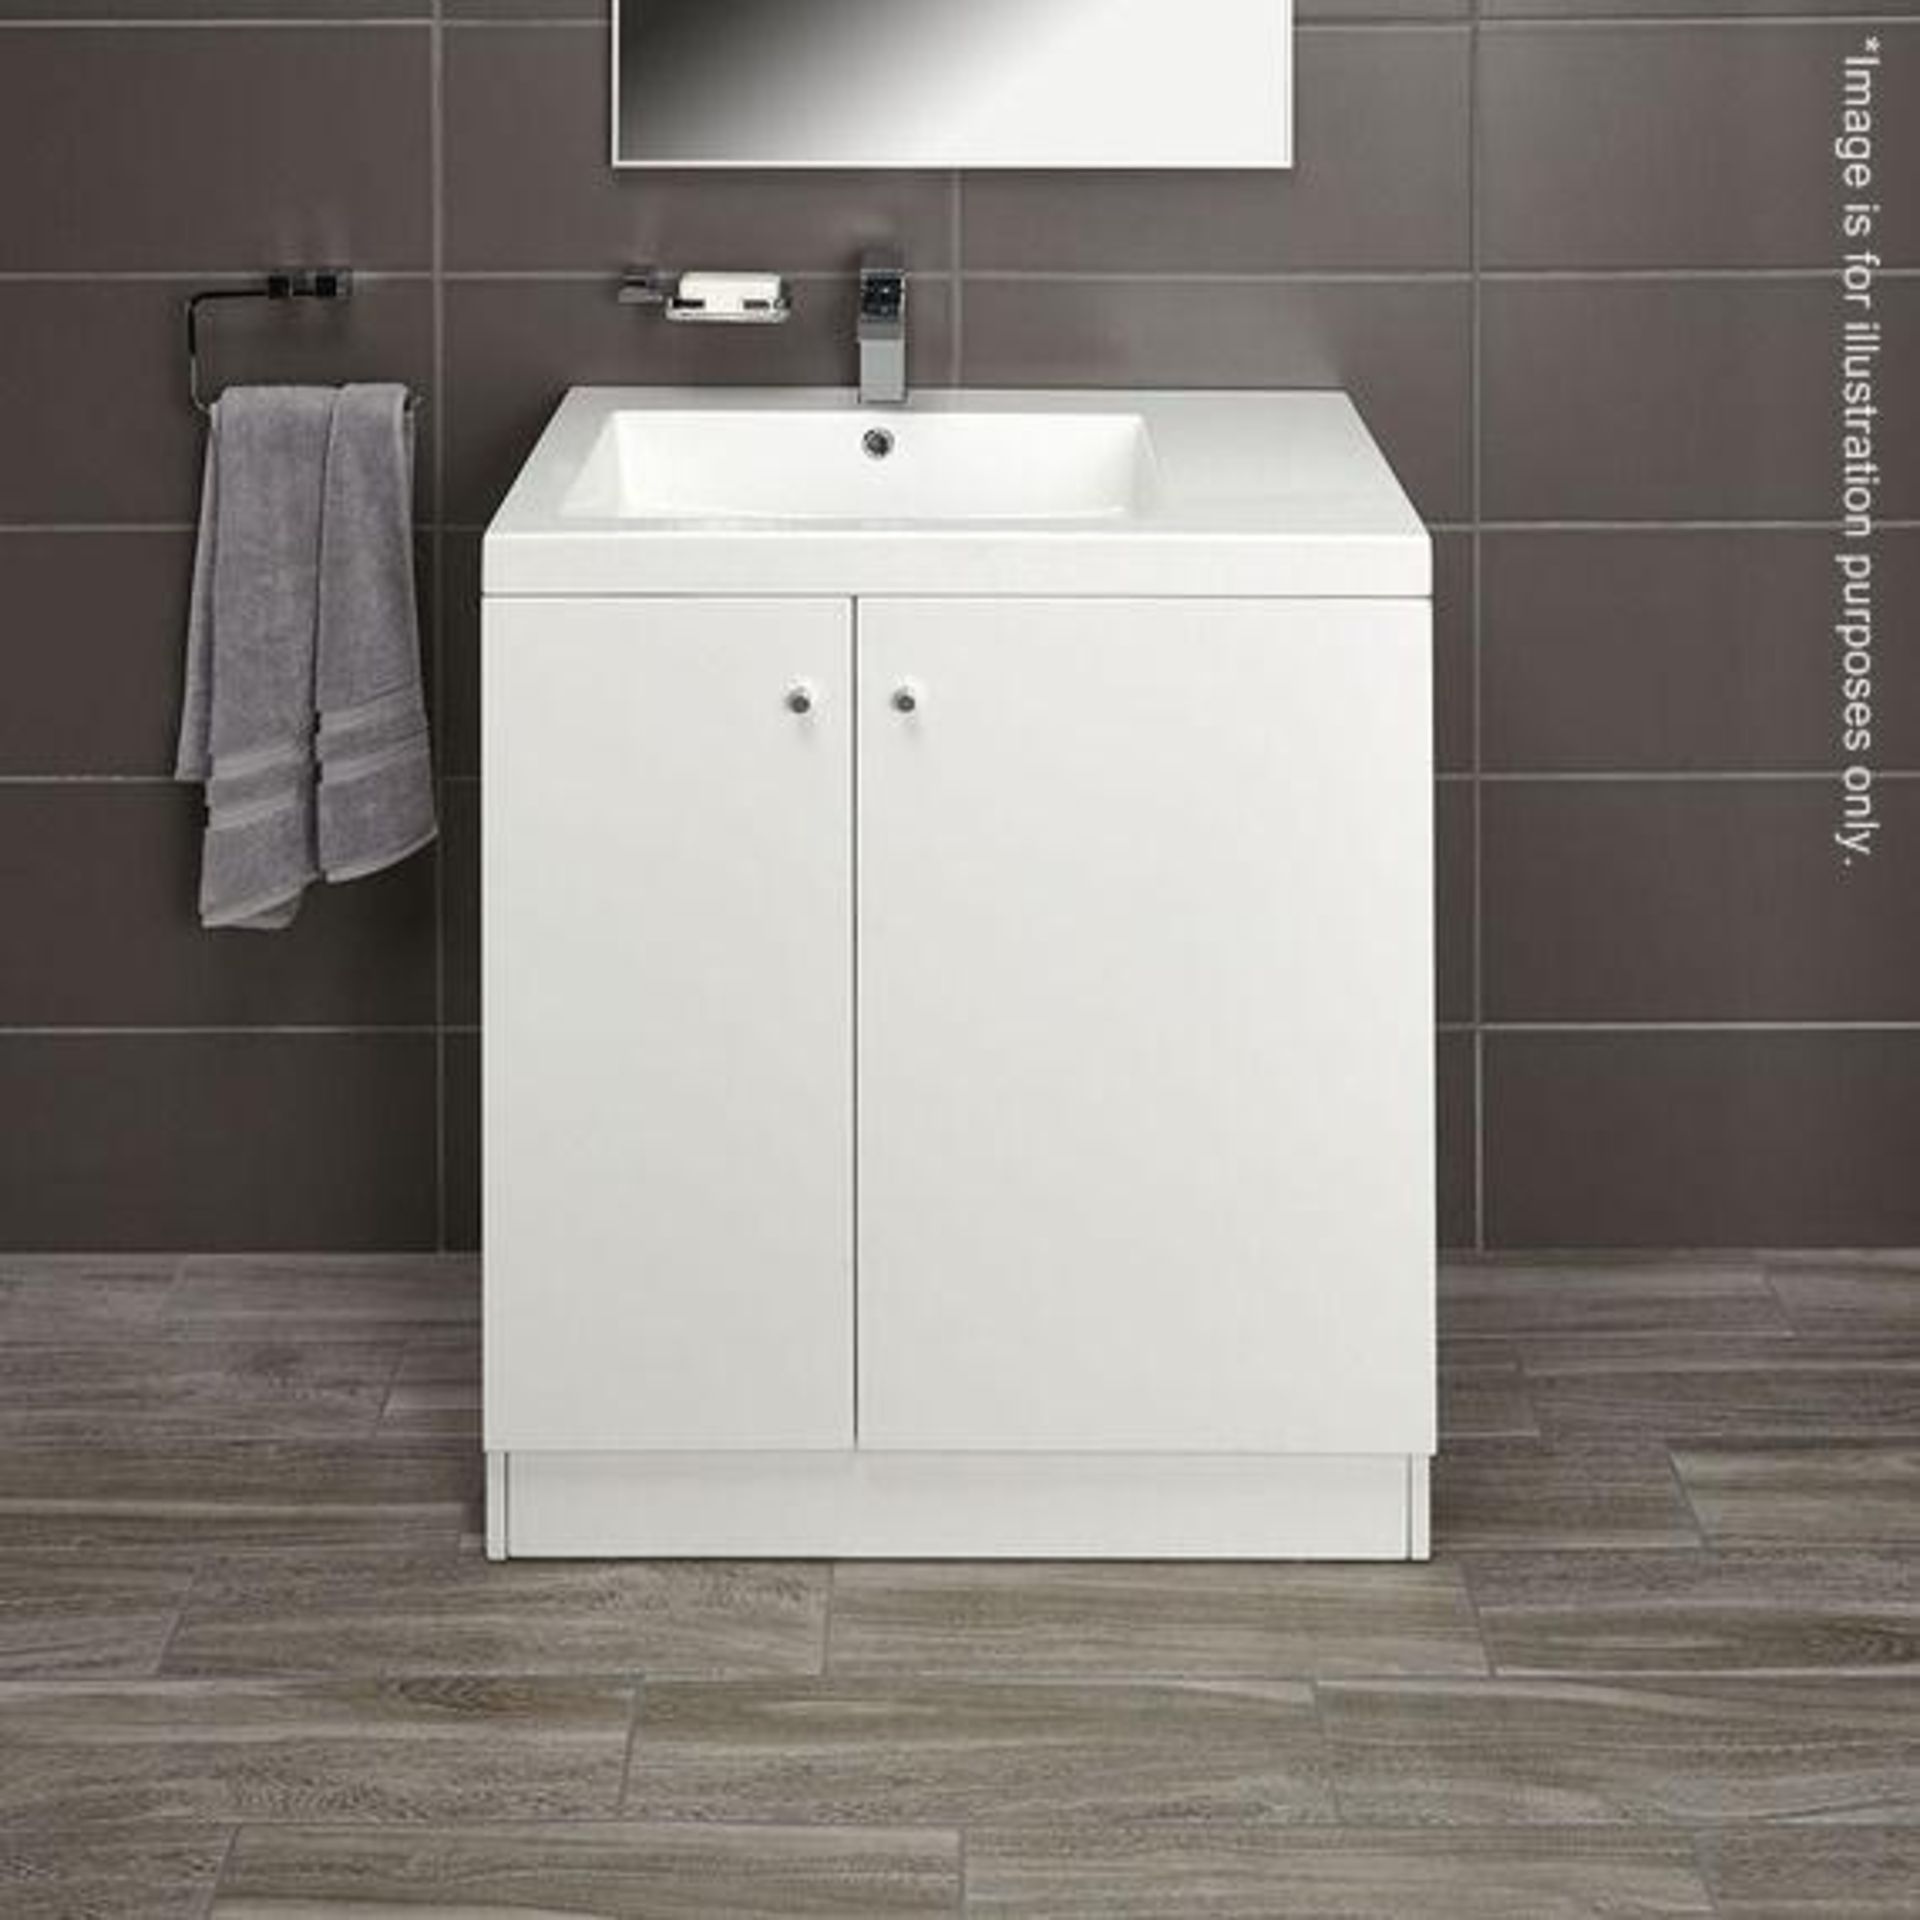 10 x Alpine Duo 750 Floorstanding Vanity Units In Gloss White - Dimensions: H80 x W75 x D49.5cm - - Image 3 of 4